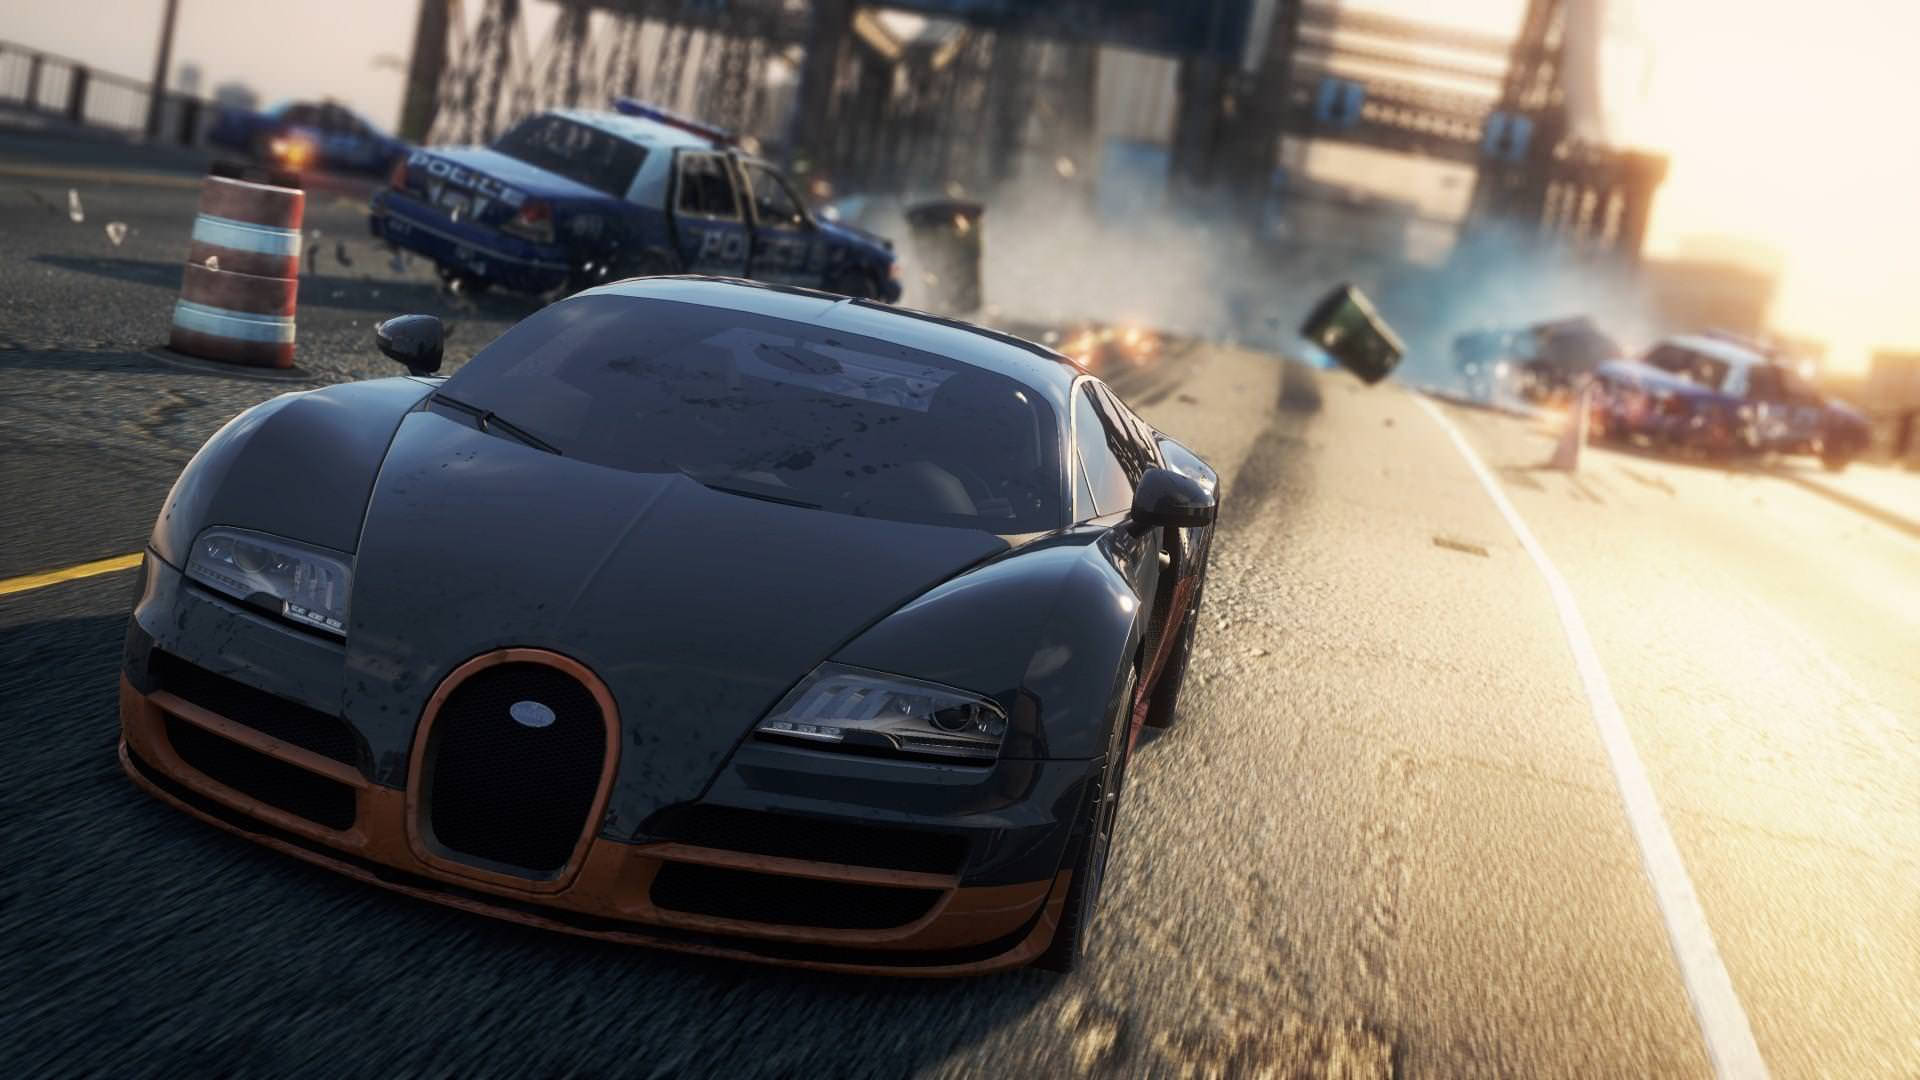 Cool Bugatti Need For Speed Background